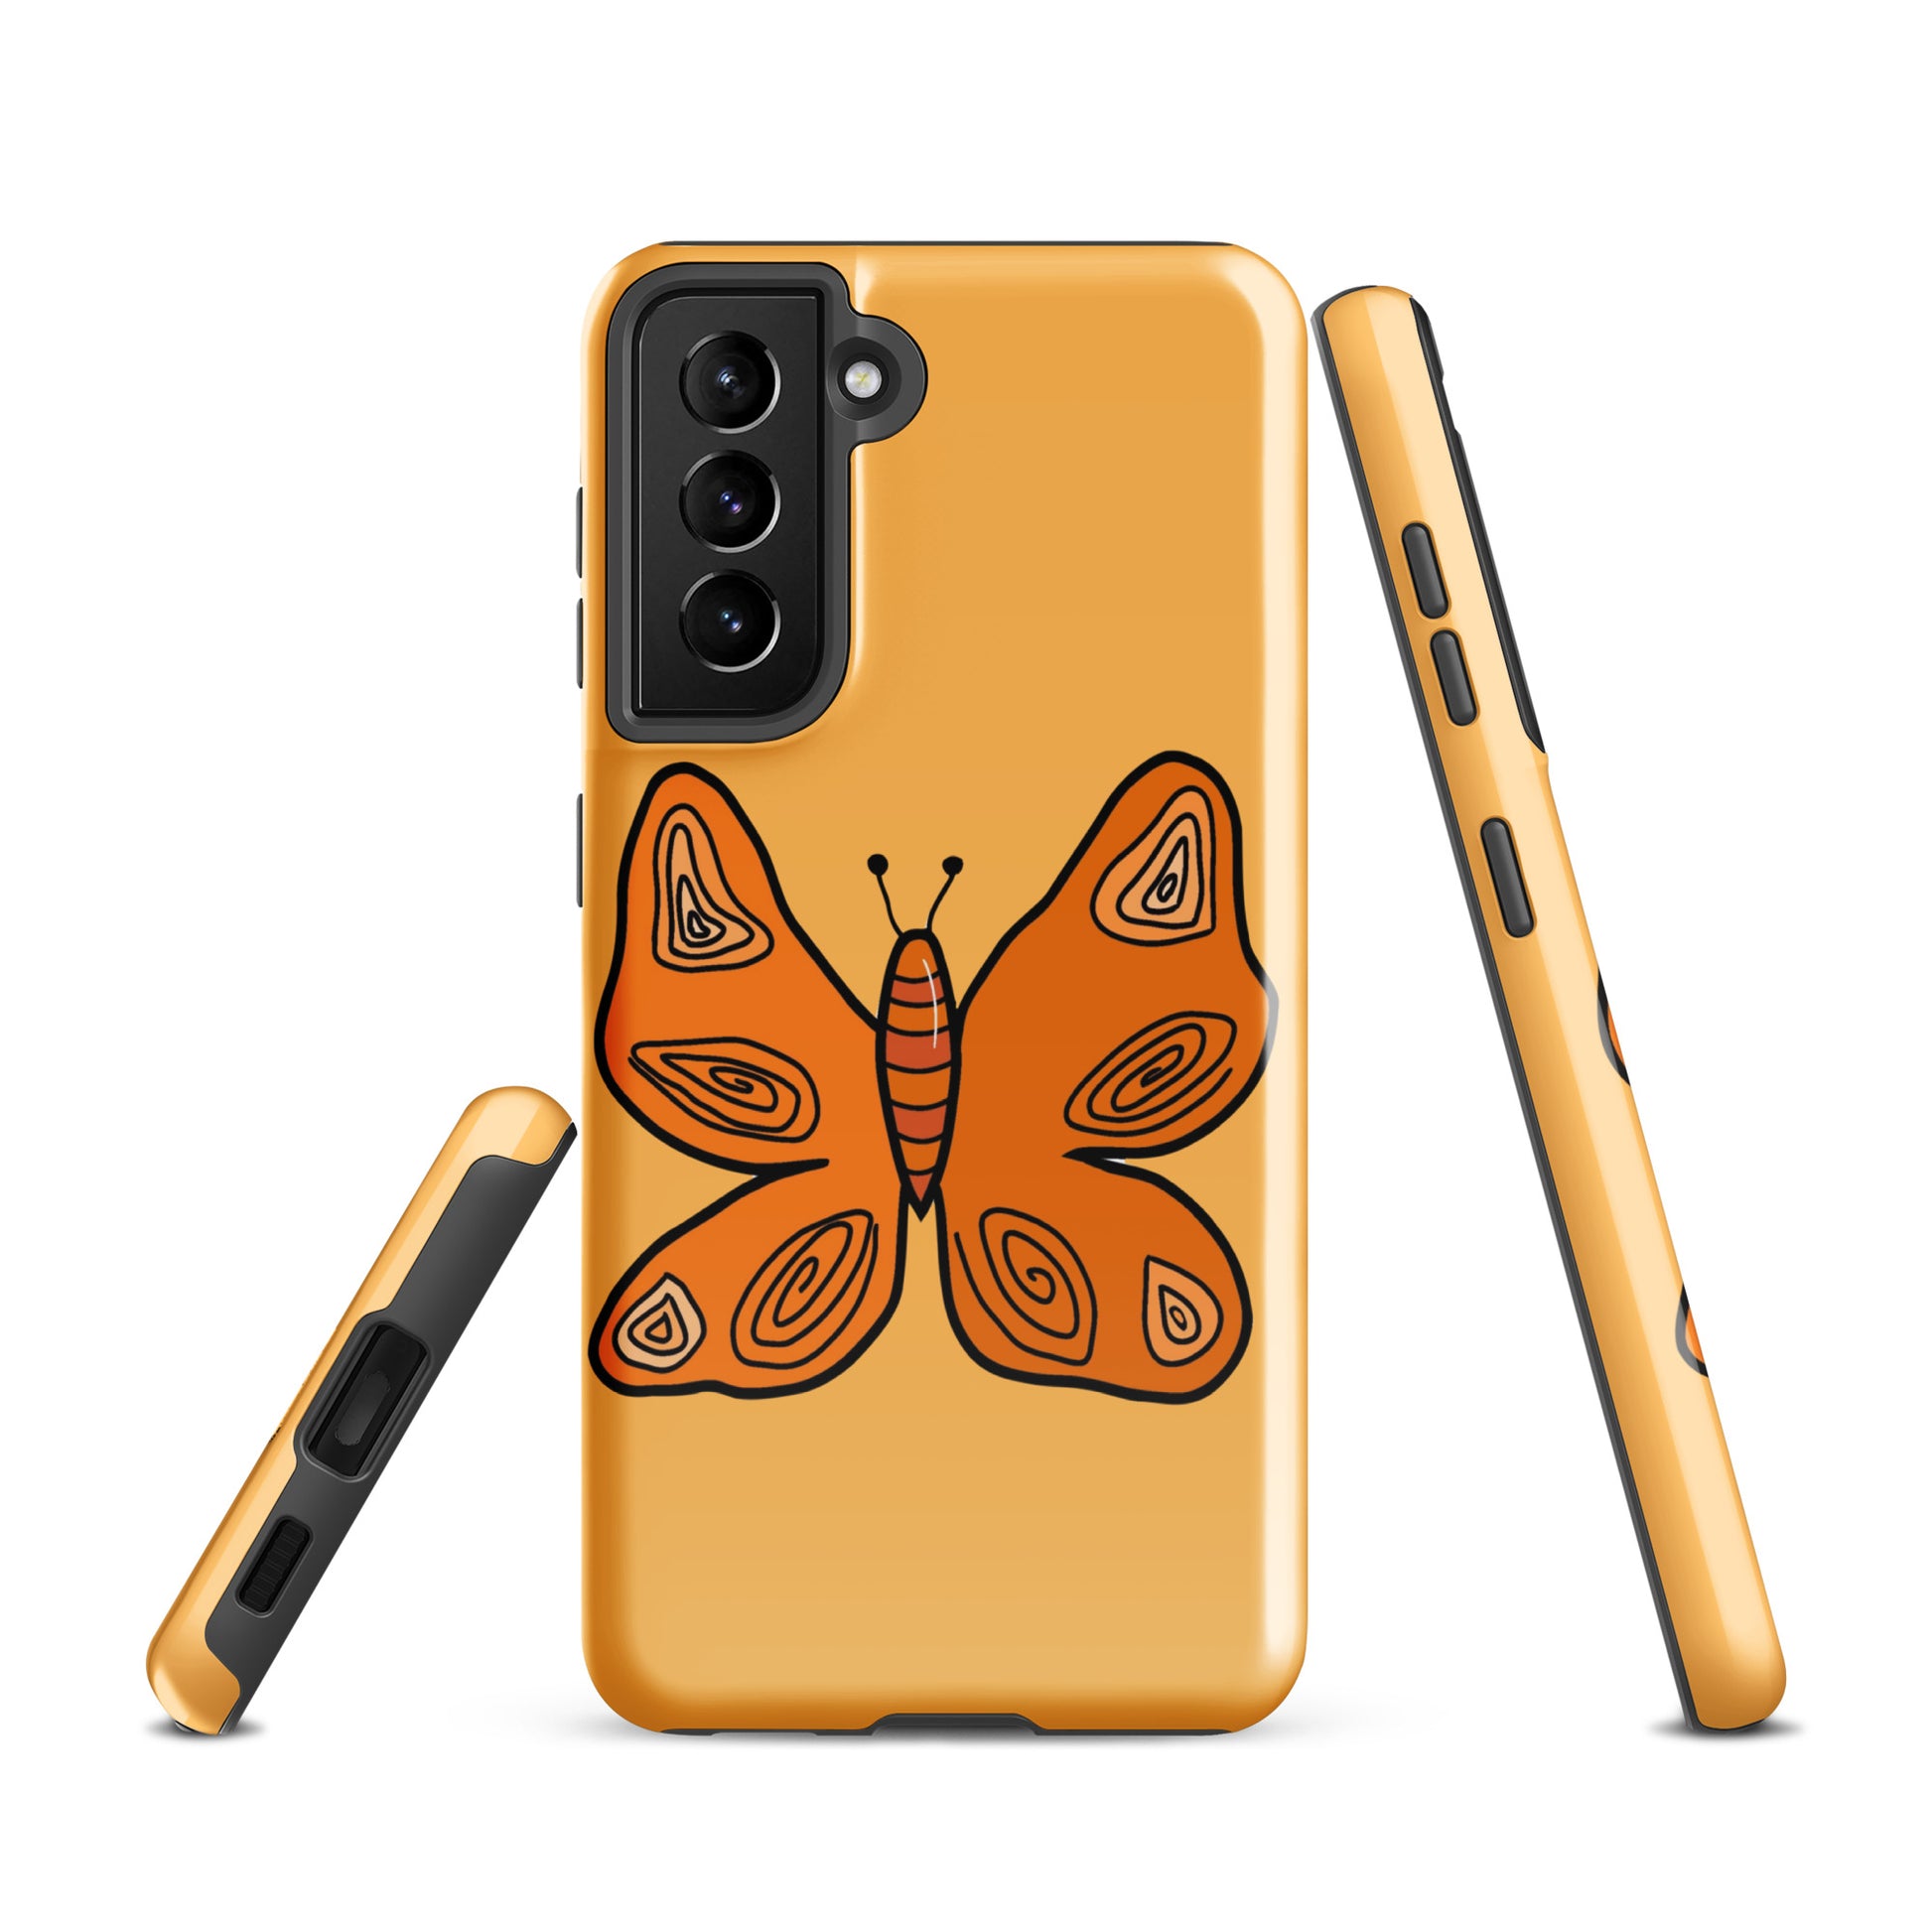 An Orange Butterfly Case for the Samsung Galaxy S21 